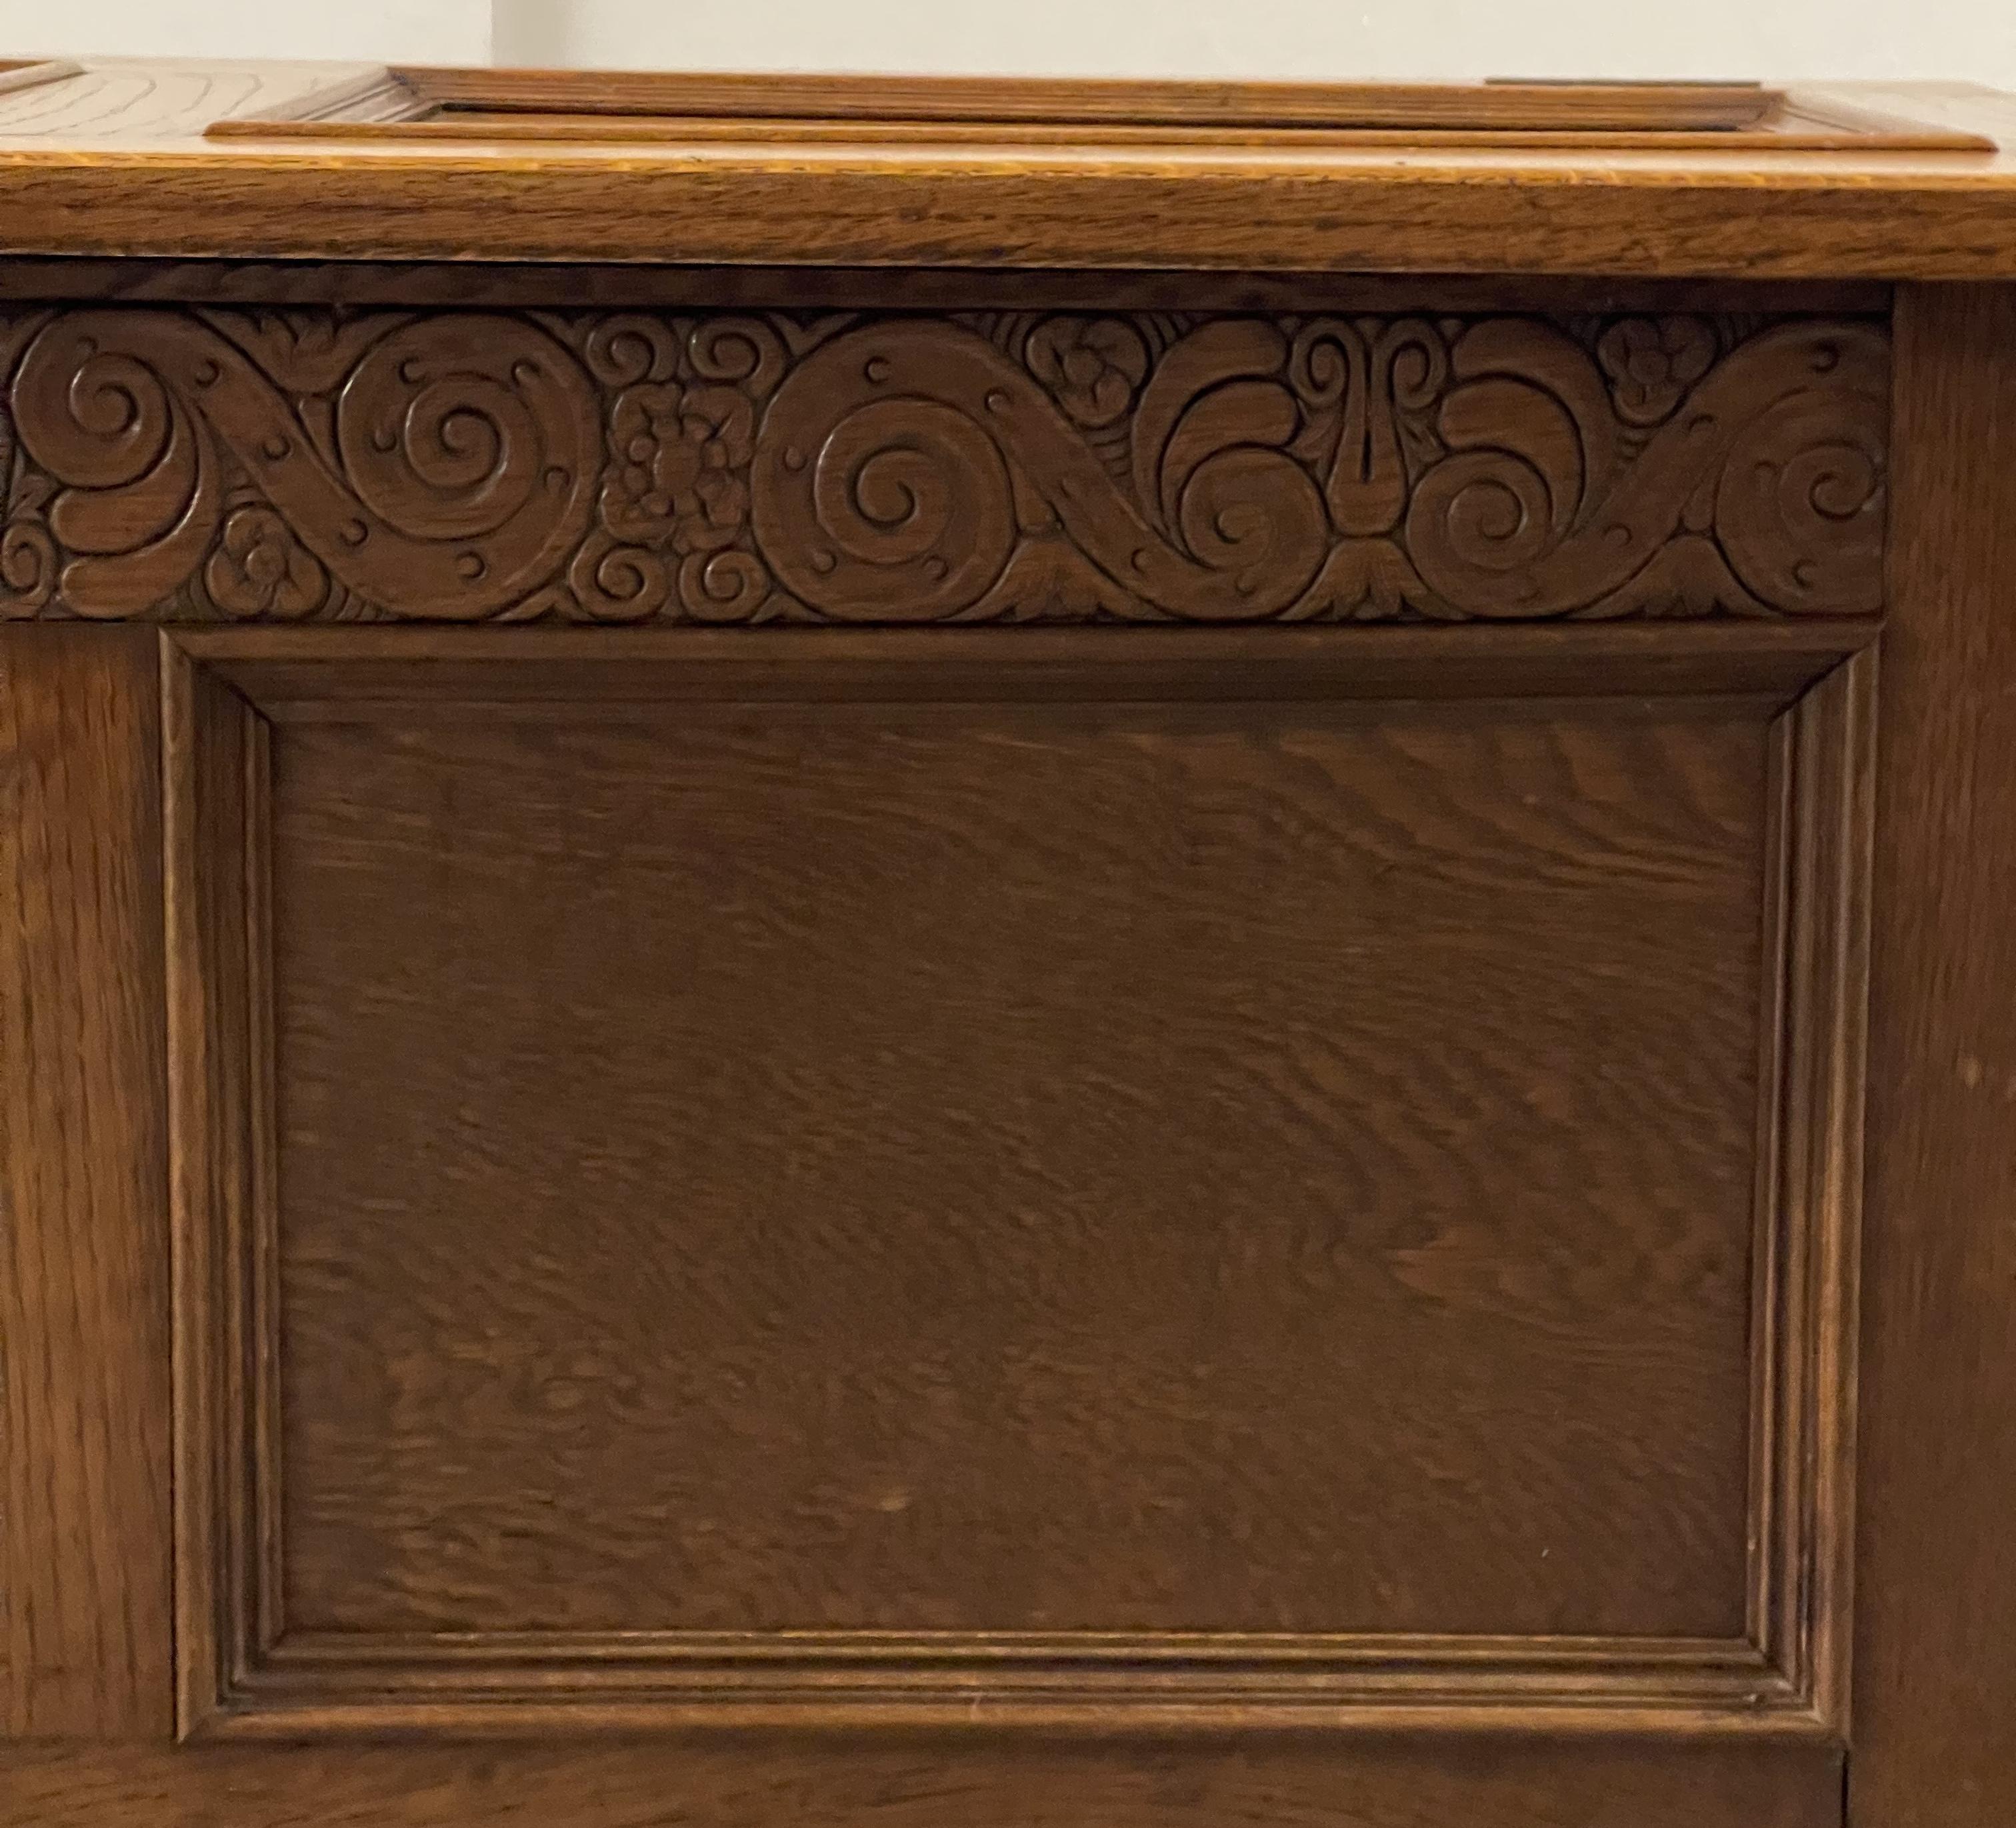 Early 20th Century Oak Blanket Chest Trunk With Scroll Carved Detailing For Sale 6